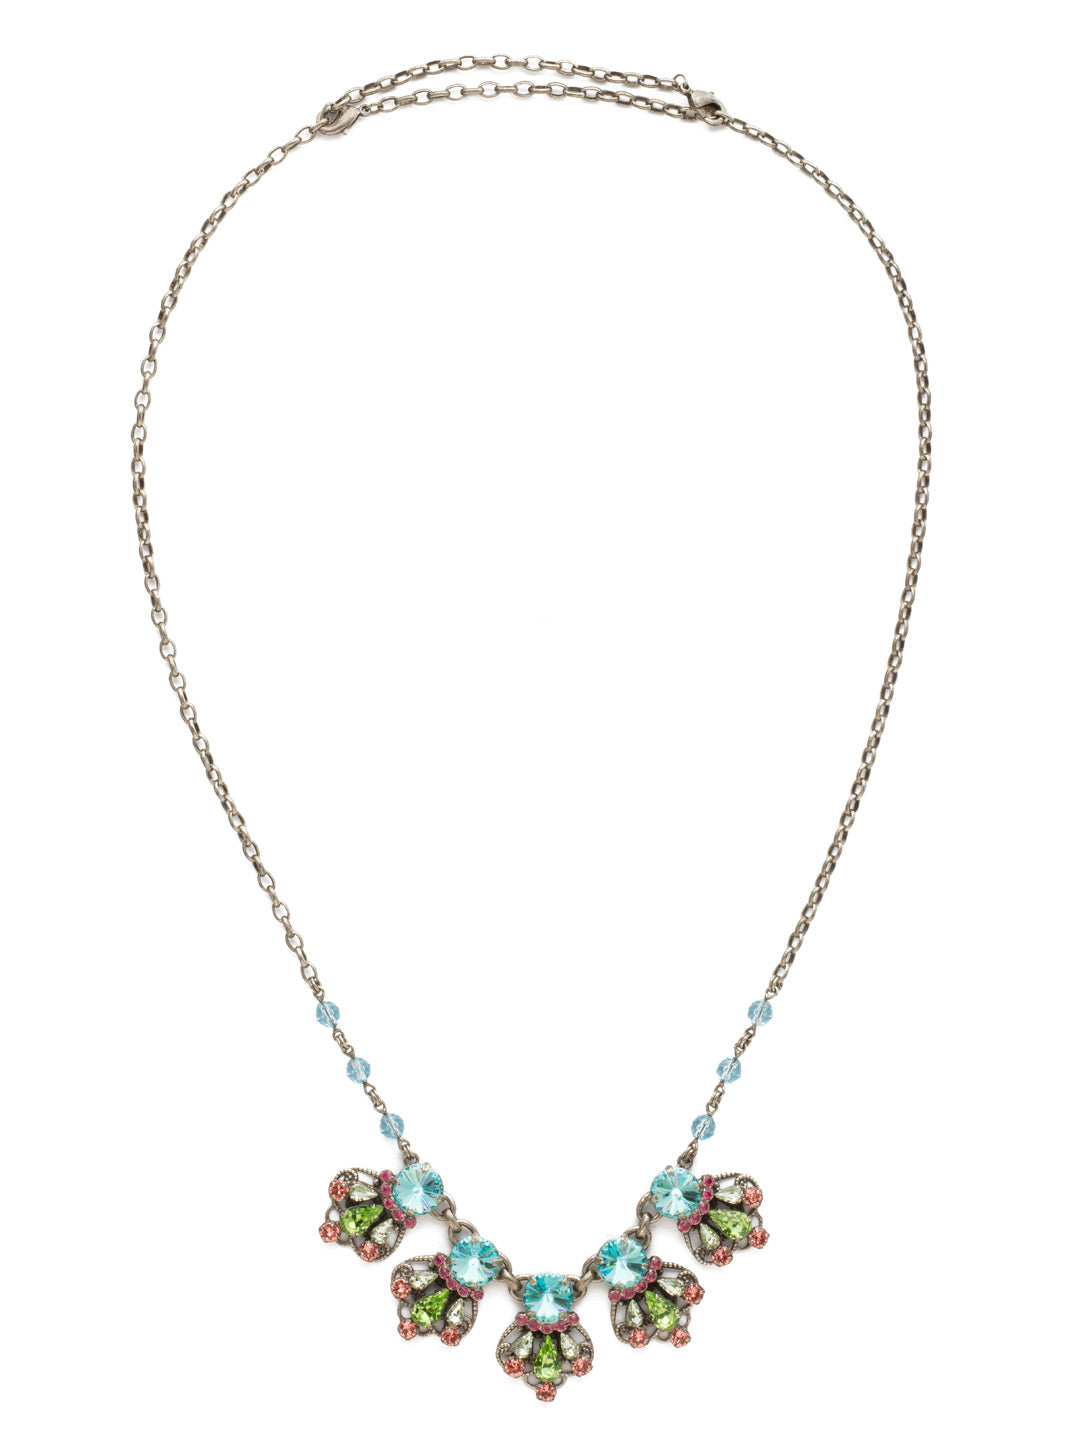 Alstromeria Necklace - NDS21ASVH - <p>Fan-shaped crystal clusters and accent beads adorn this long-strand stunner. This style also features a double lobster claw closure which allows for extreme length adjustment and easy layering with other necklaces. From Sorrelli's Vivid Horizons collection in our Antique Silver-tone finish.</p>